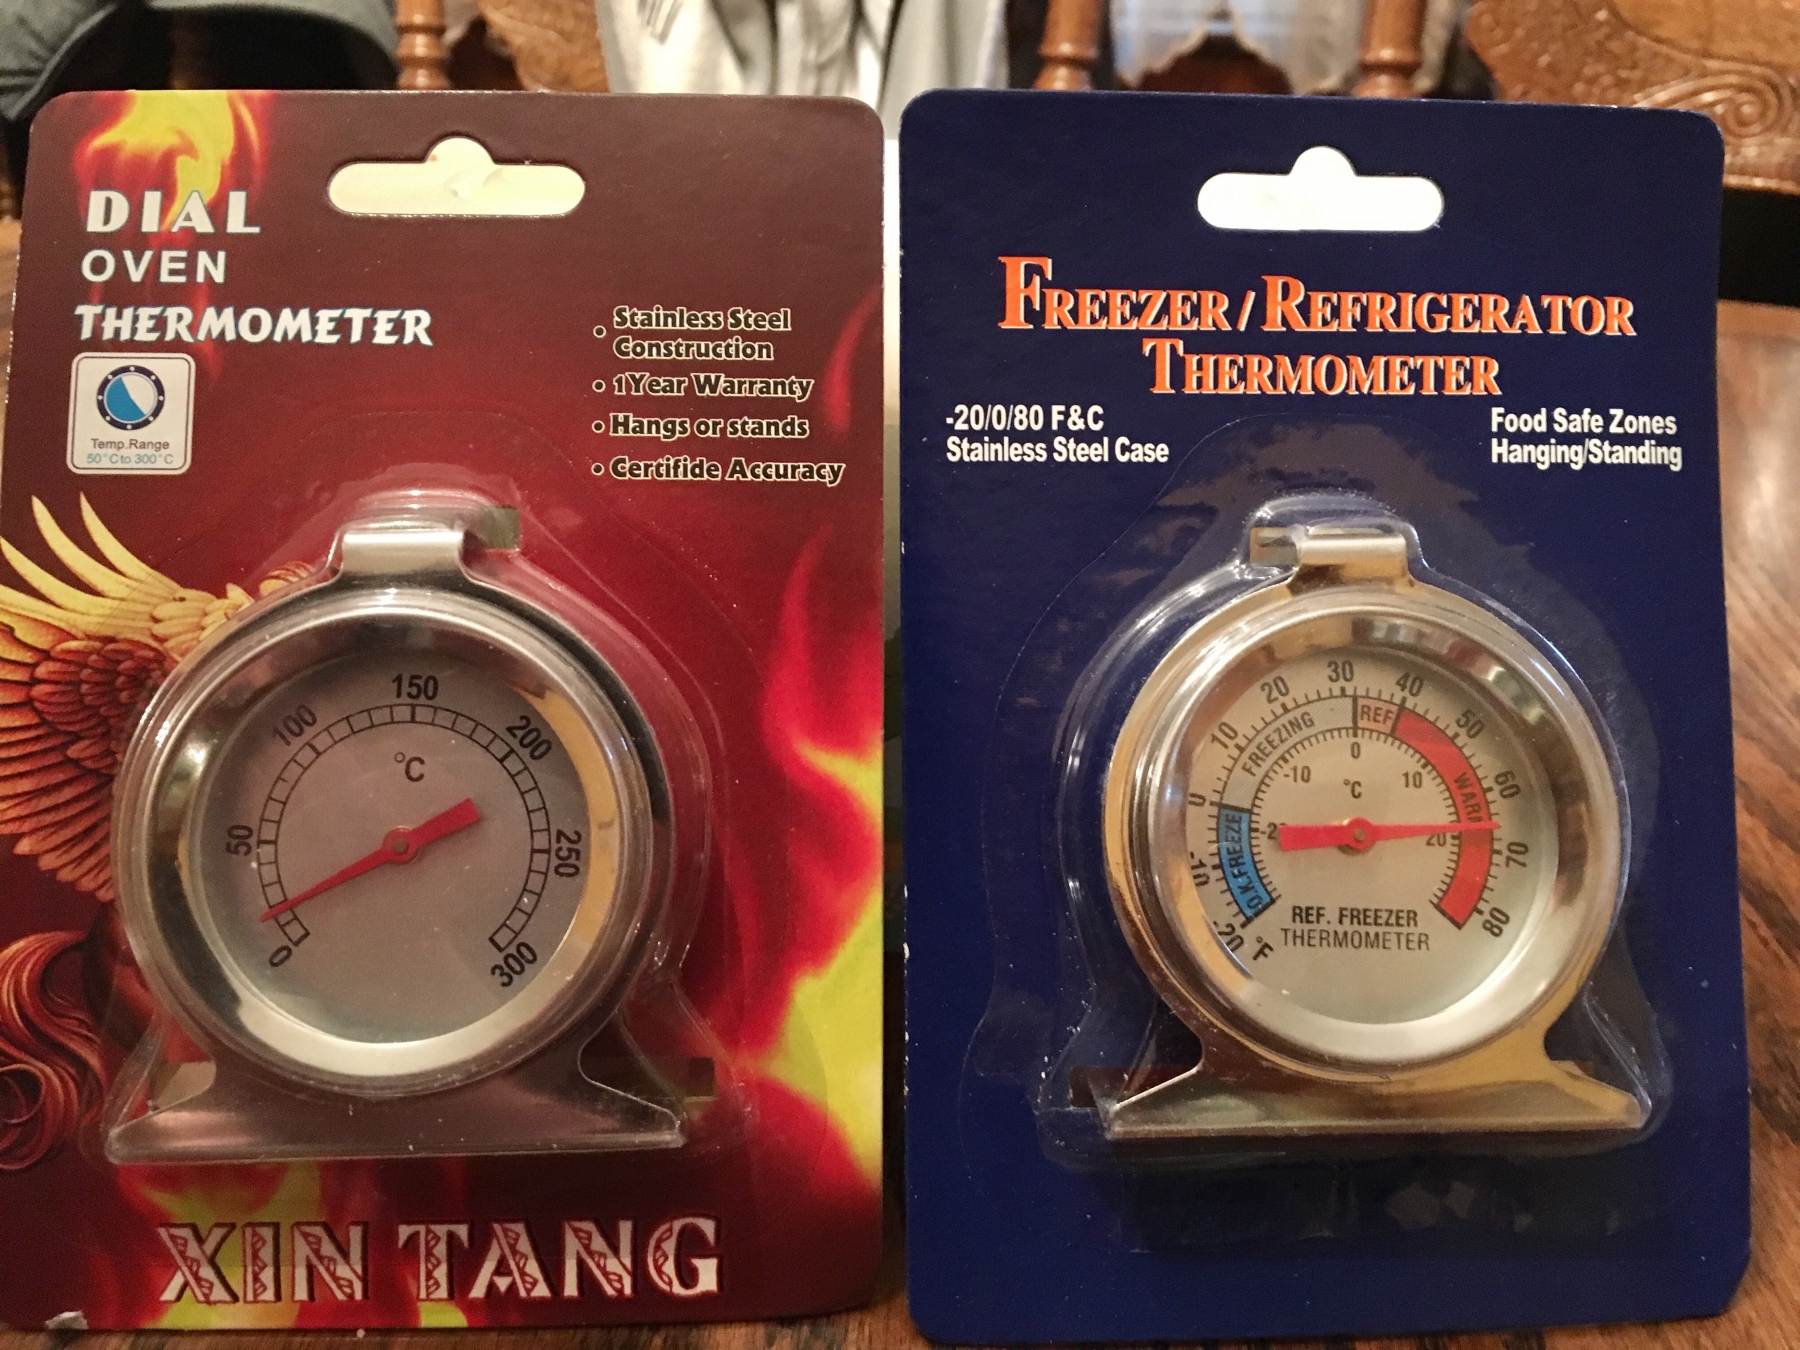 Good, Basic Thermometers